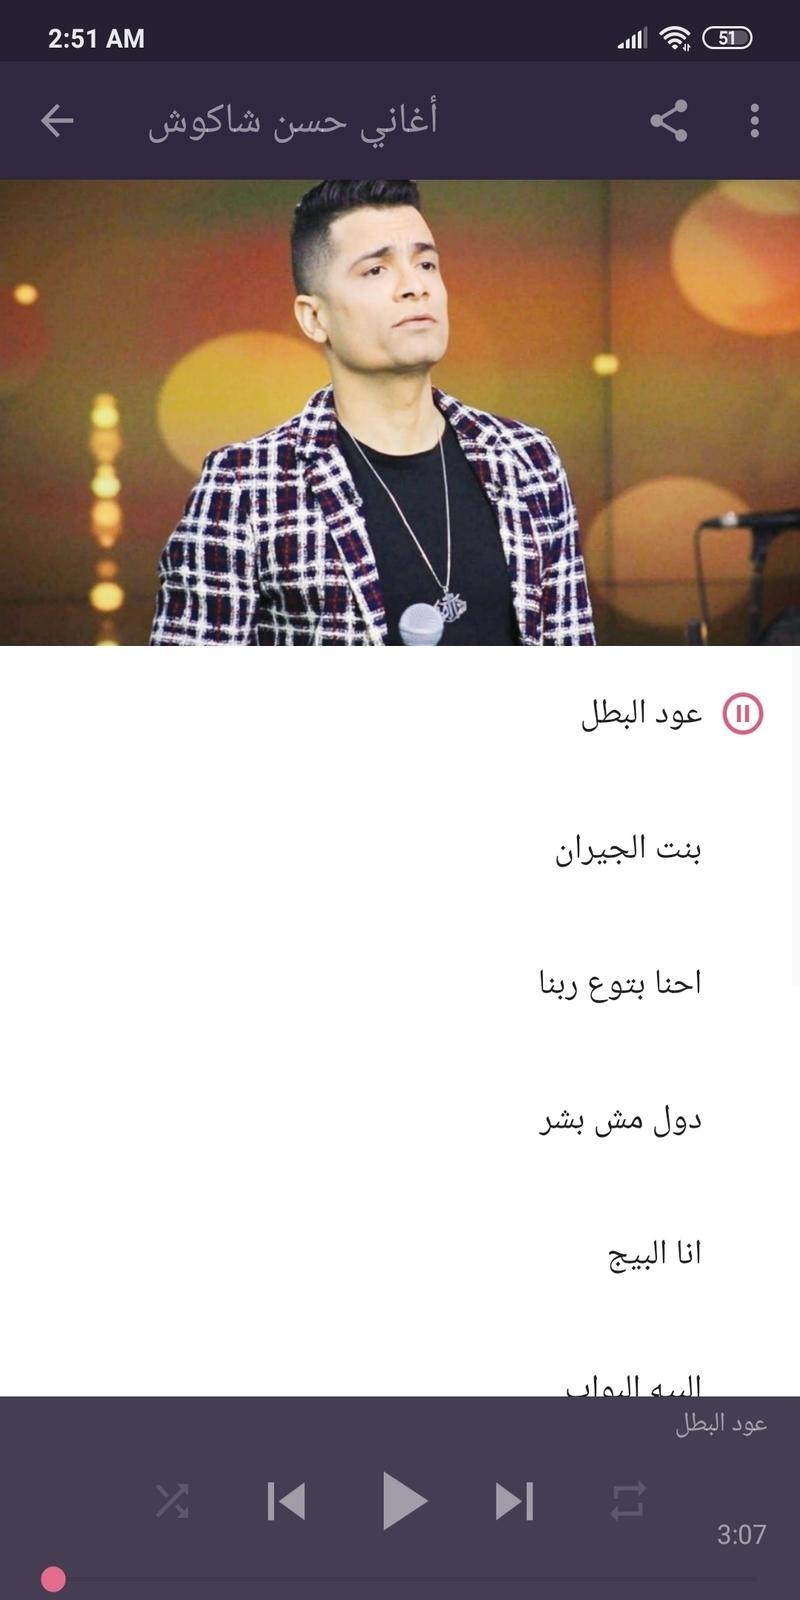 Hassan Shakosh Songs 2020 - Without Net for Android - APK Download